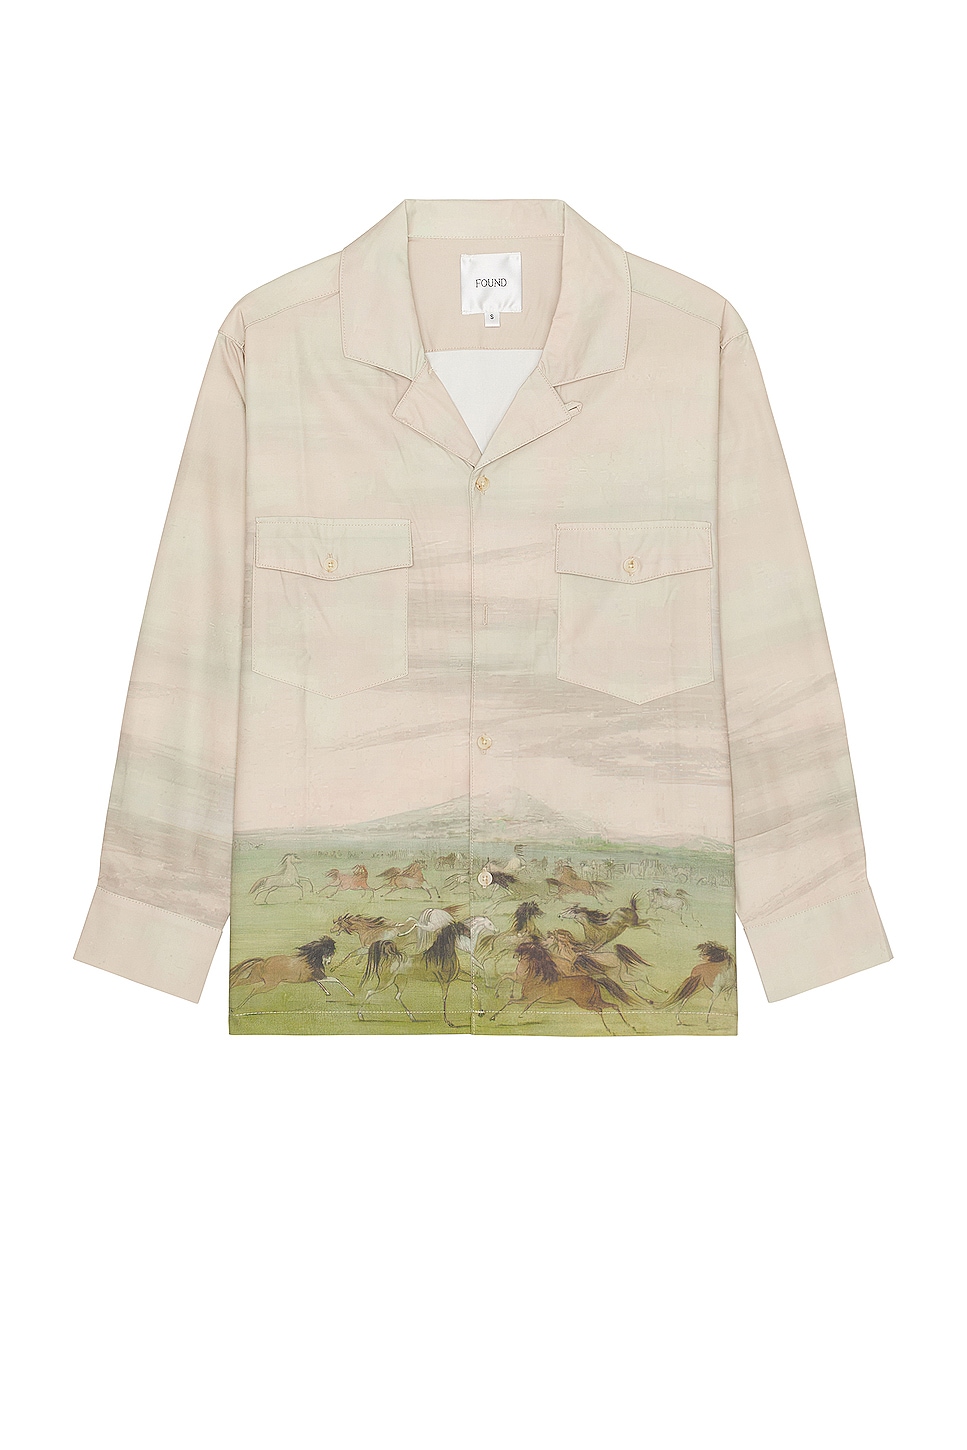 Image 1 of Found Wildlife Field Long Sleeve Camp Shirt in Cream